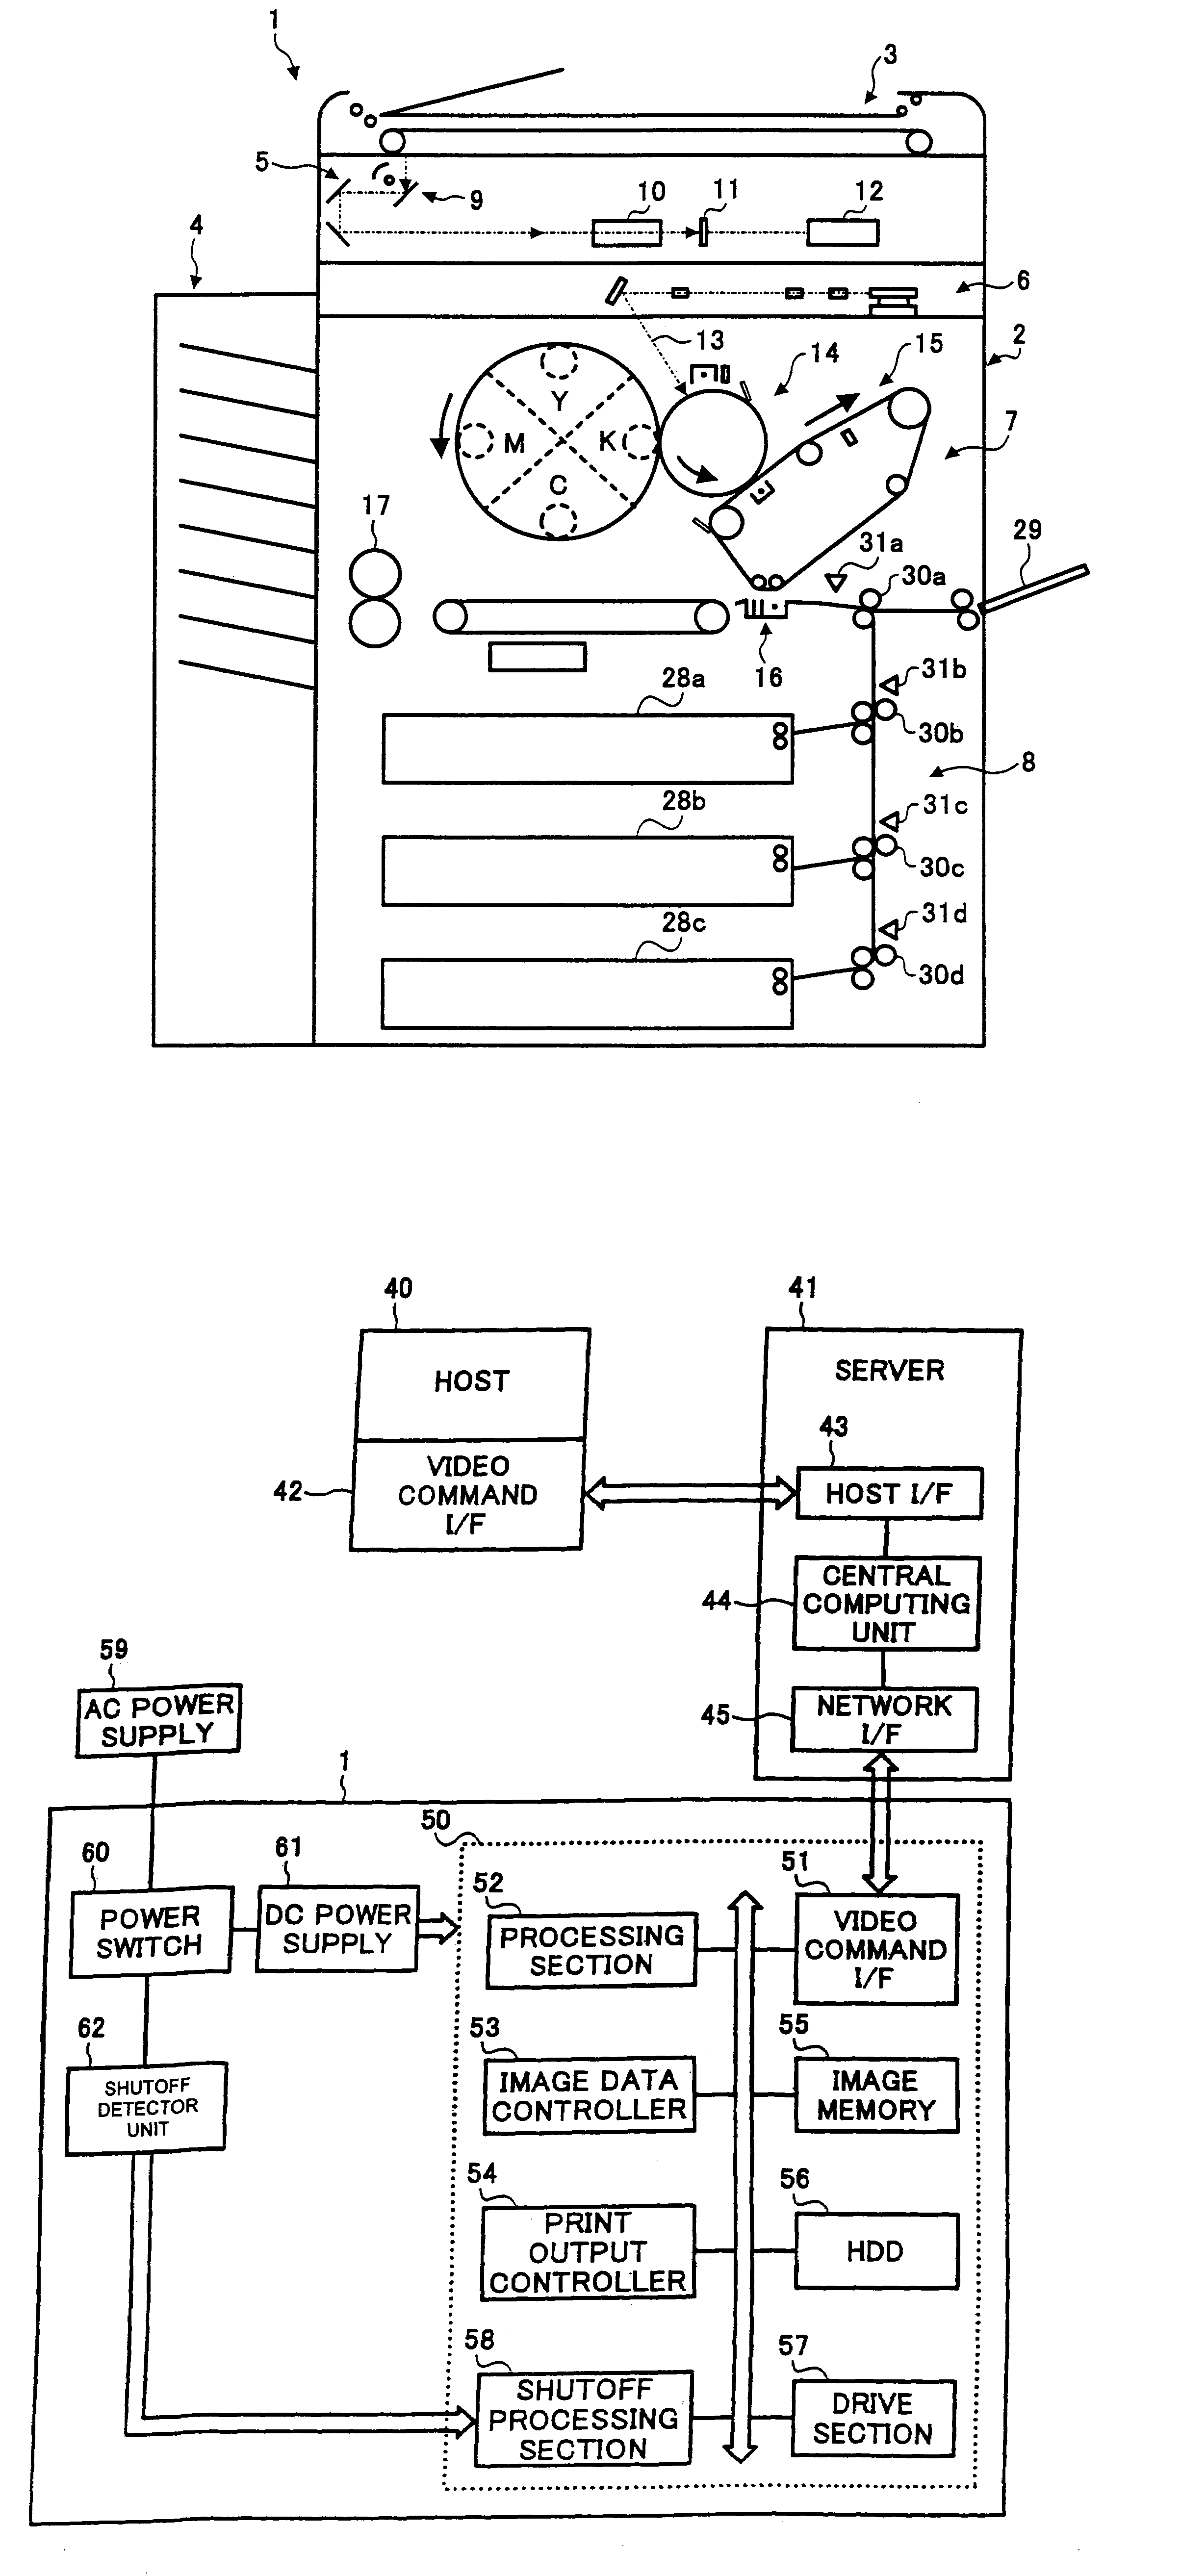 Power supply control device for an image forming apparatus